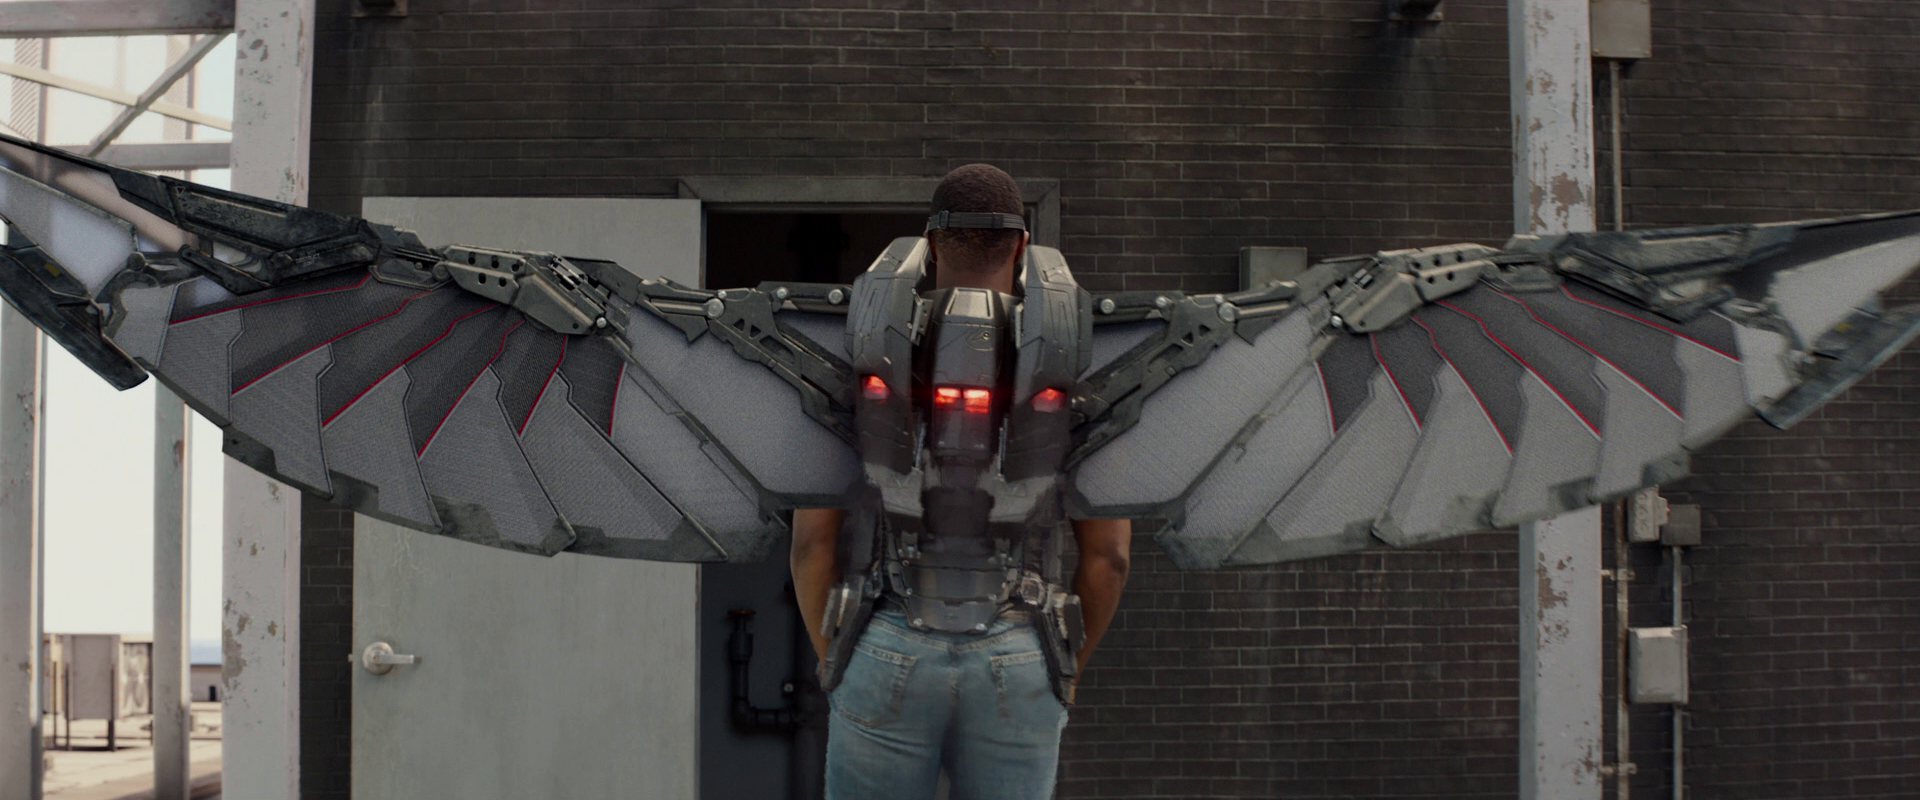 A man stands with a winged jetpack on.